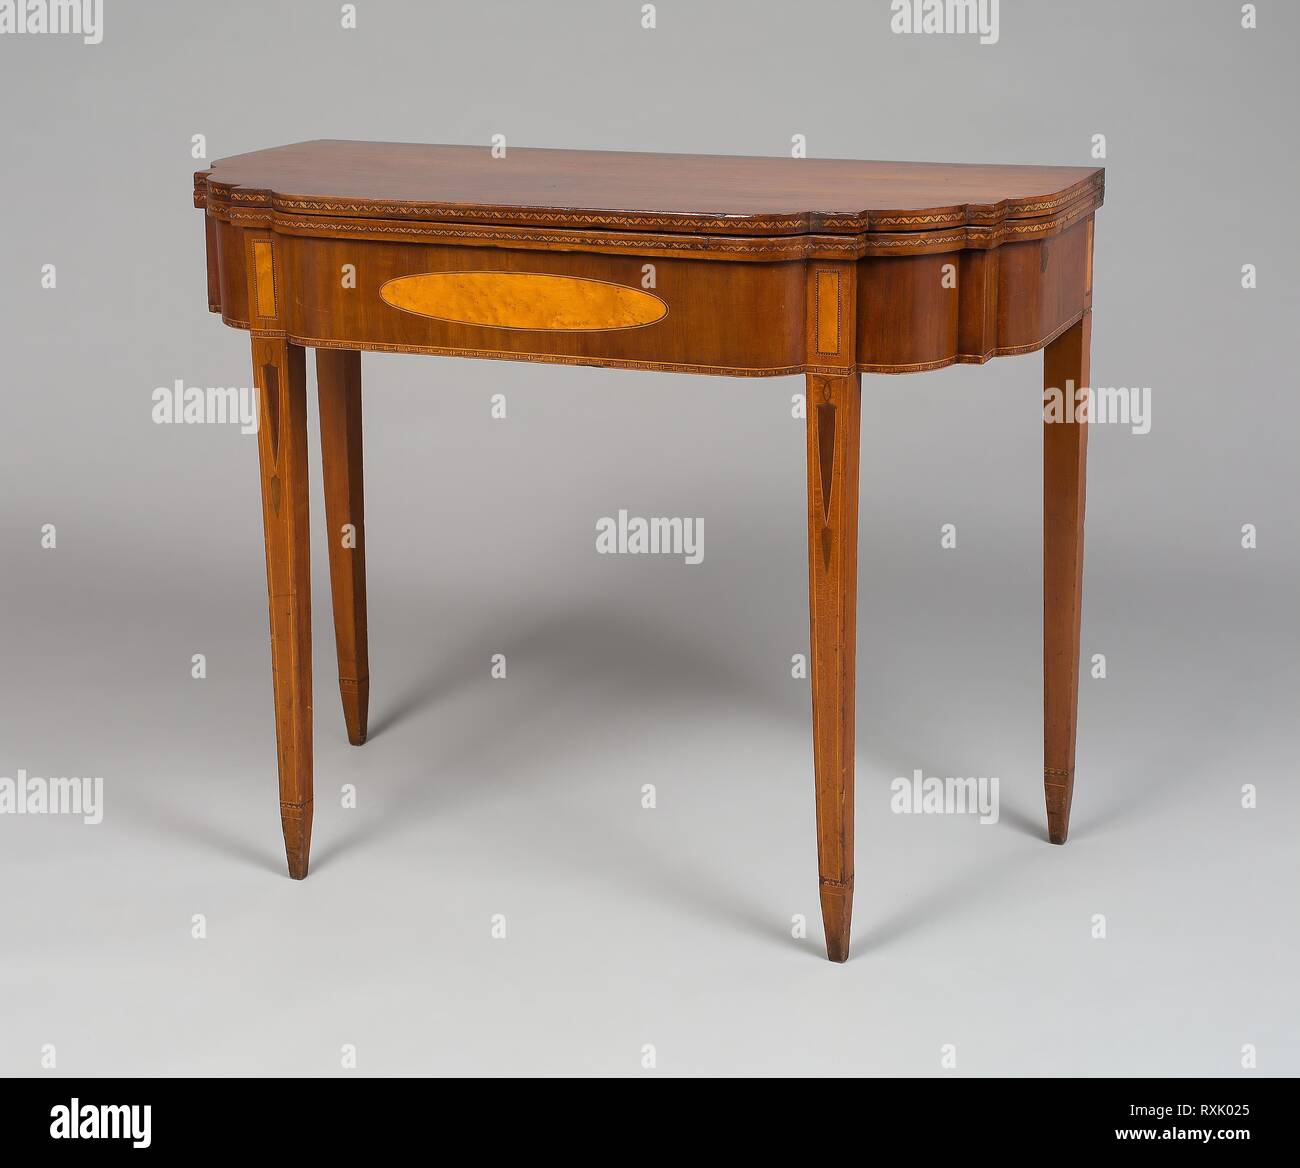 Card Table. American; Chester, Vermont. Date: 1816-1830. Dimensions: 74.9 × 94 × 45.4 cm (closed lid) (29 1/2 × 37 × 17 7/8 in.). Cherry with Bird's-eye maple. Origin: Chester. Museum: The Chicago Art Institute. Stock Photo